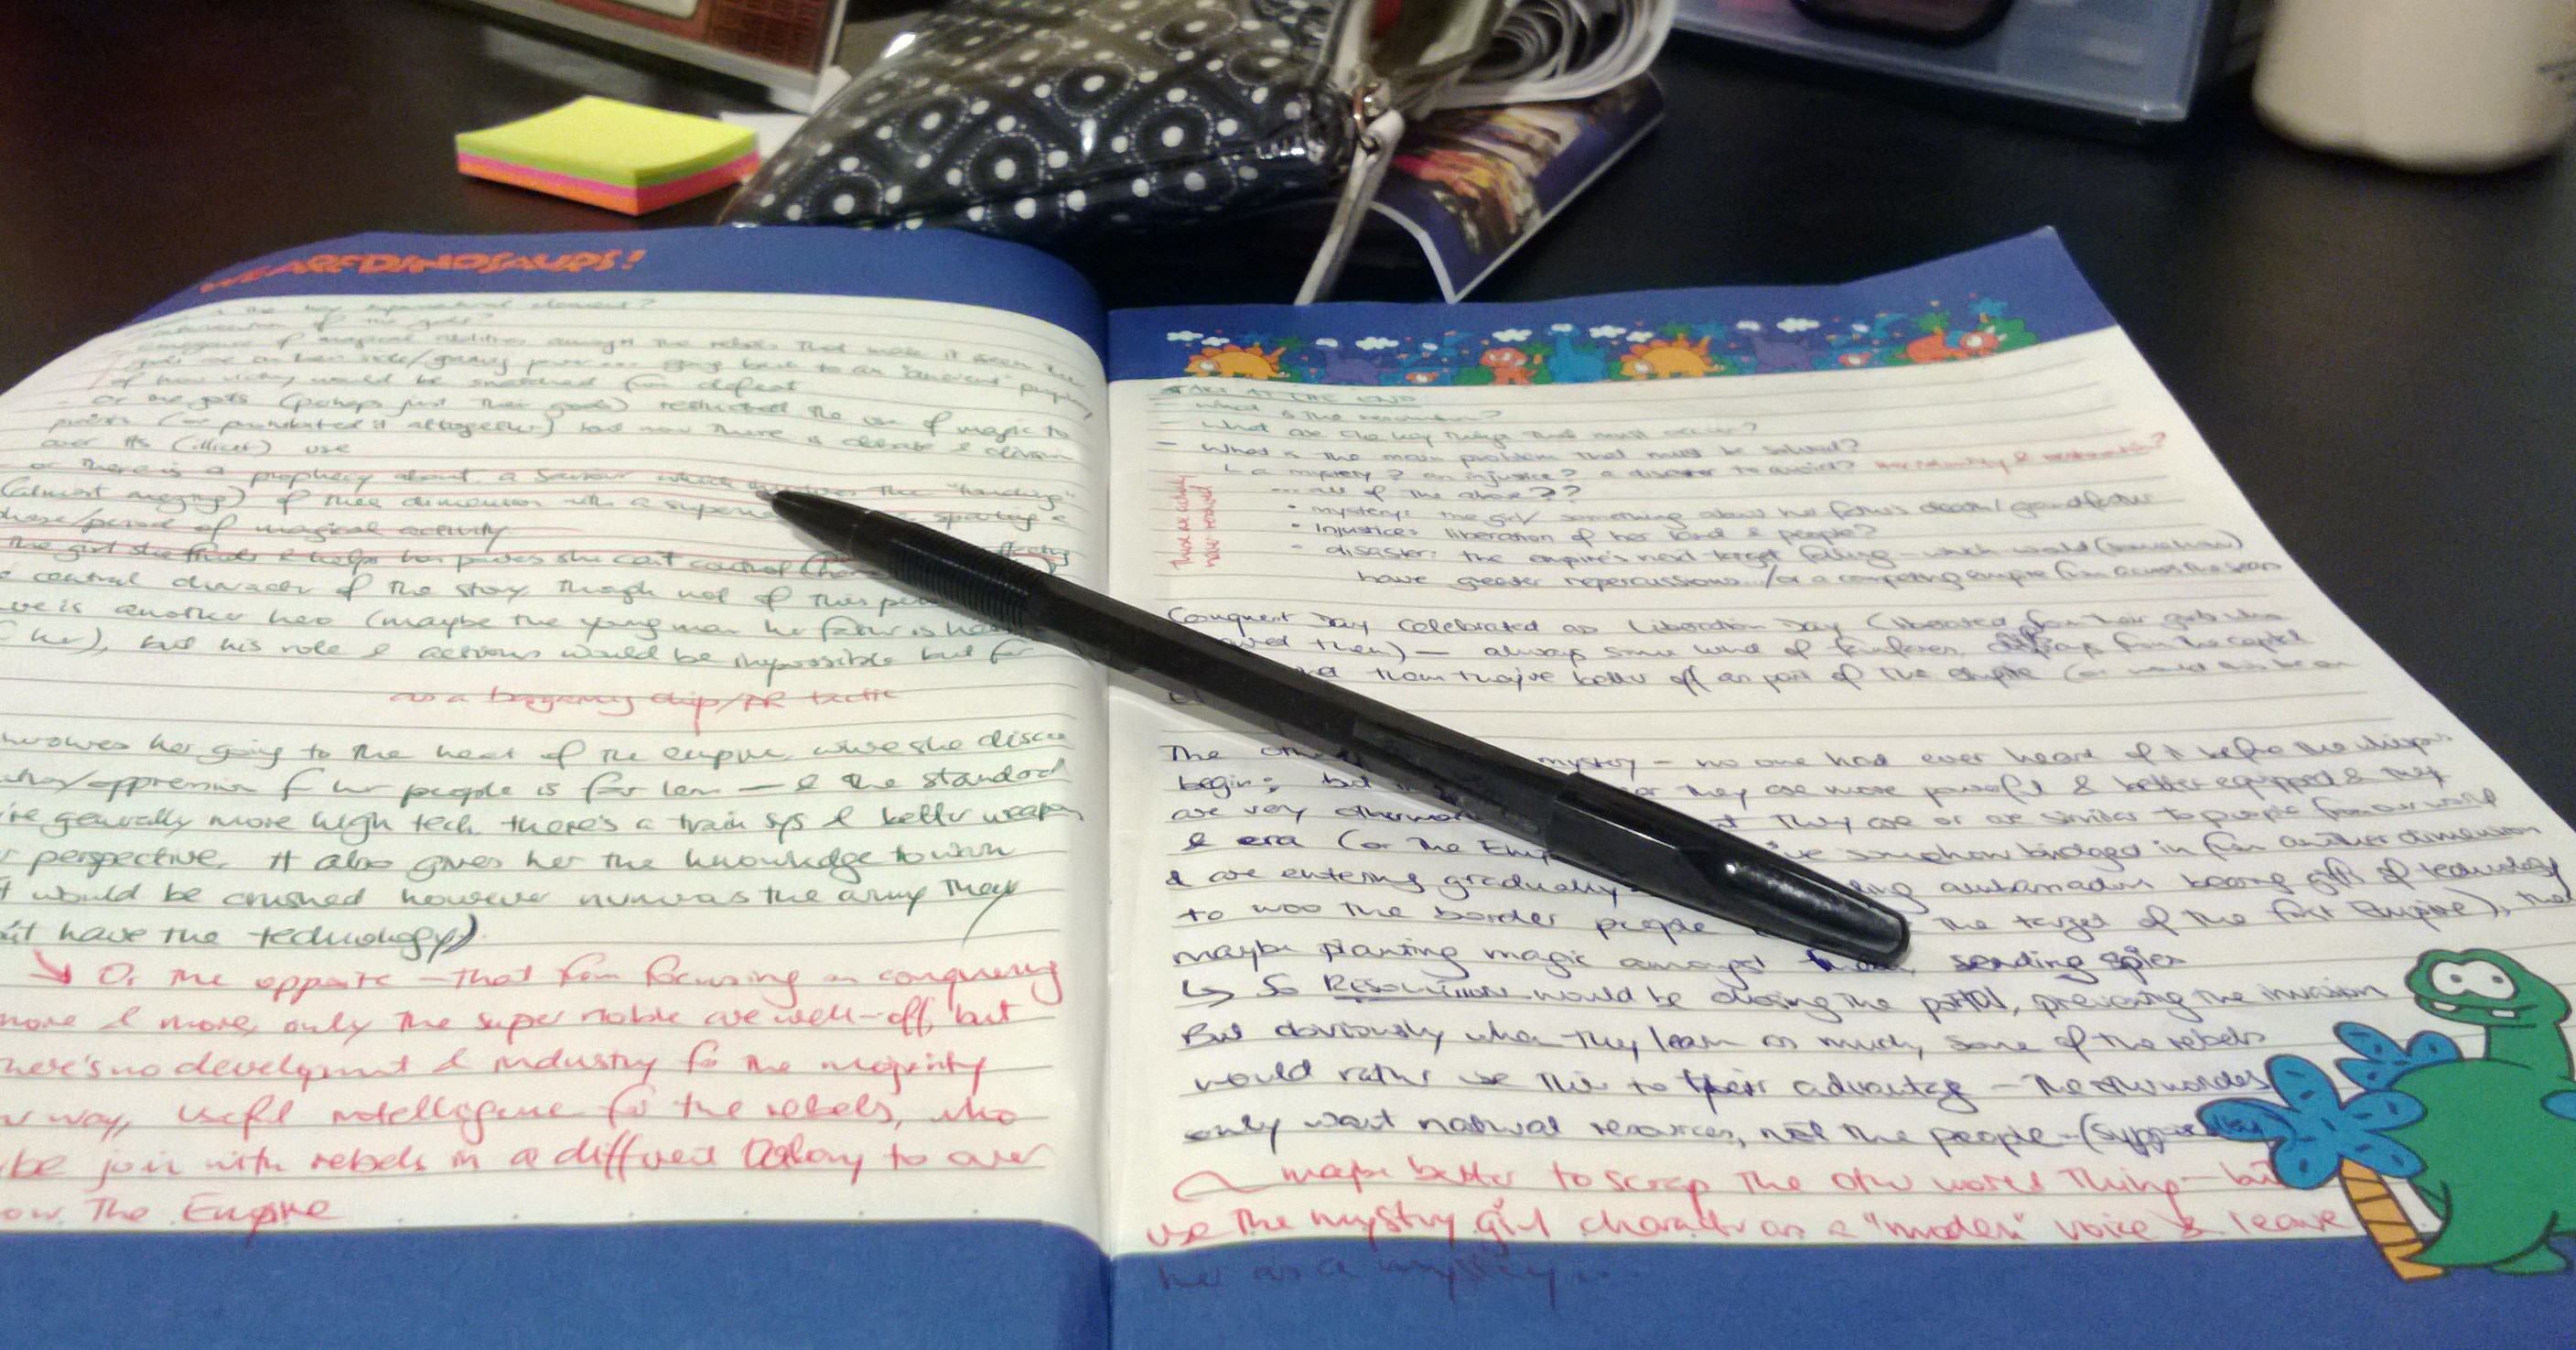 Notebook of novel ideas and planning